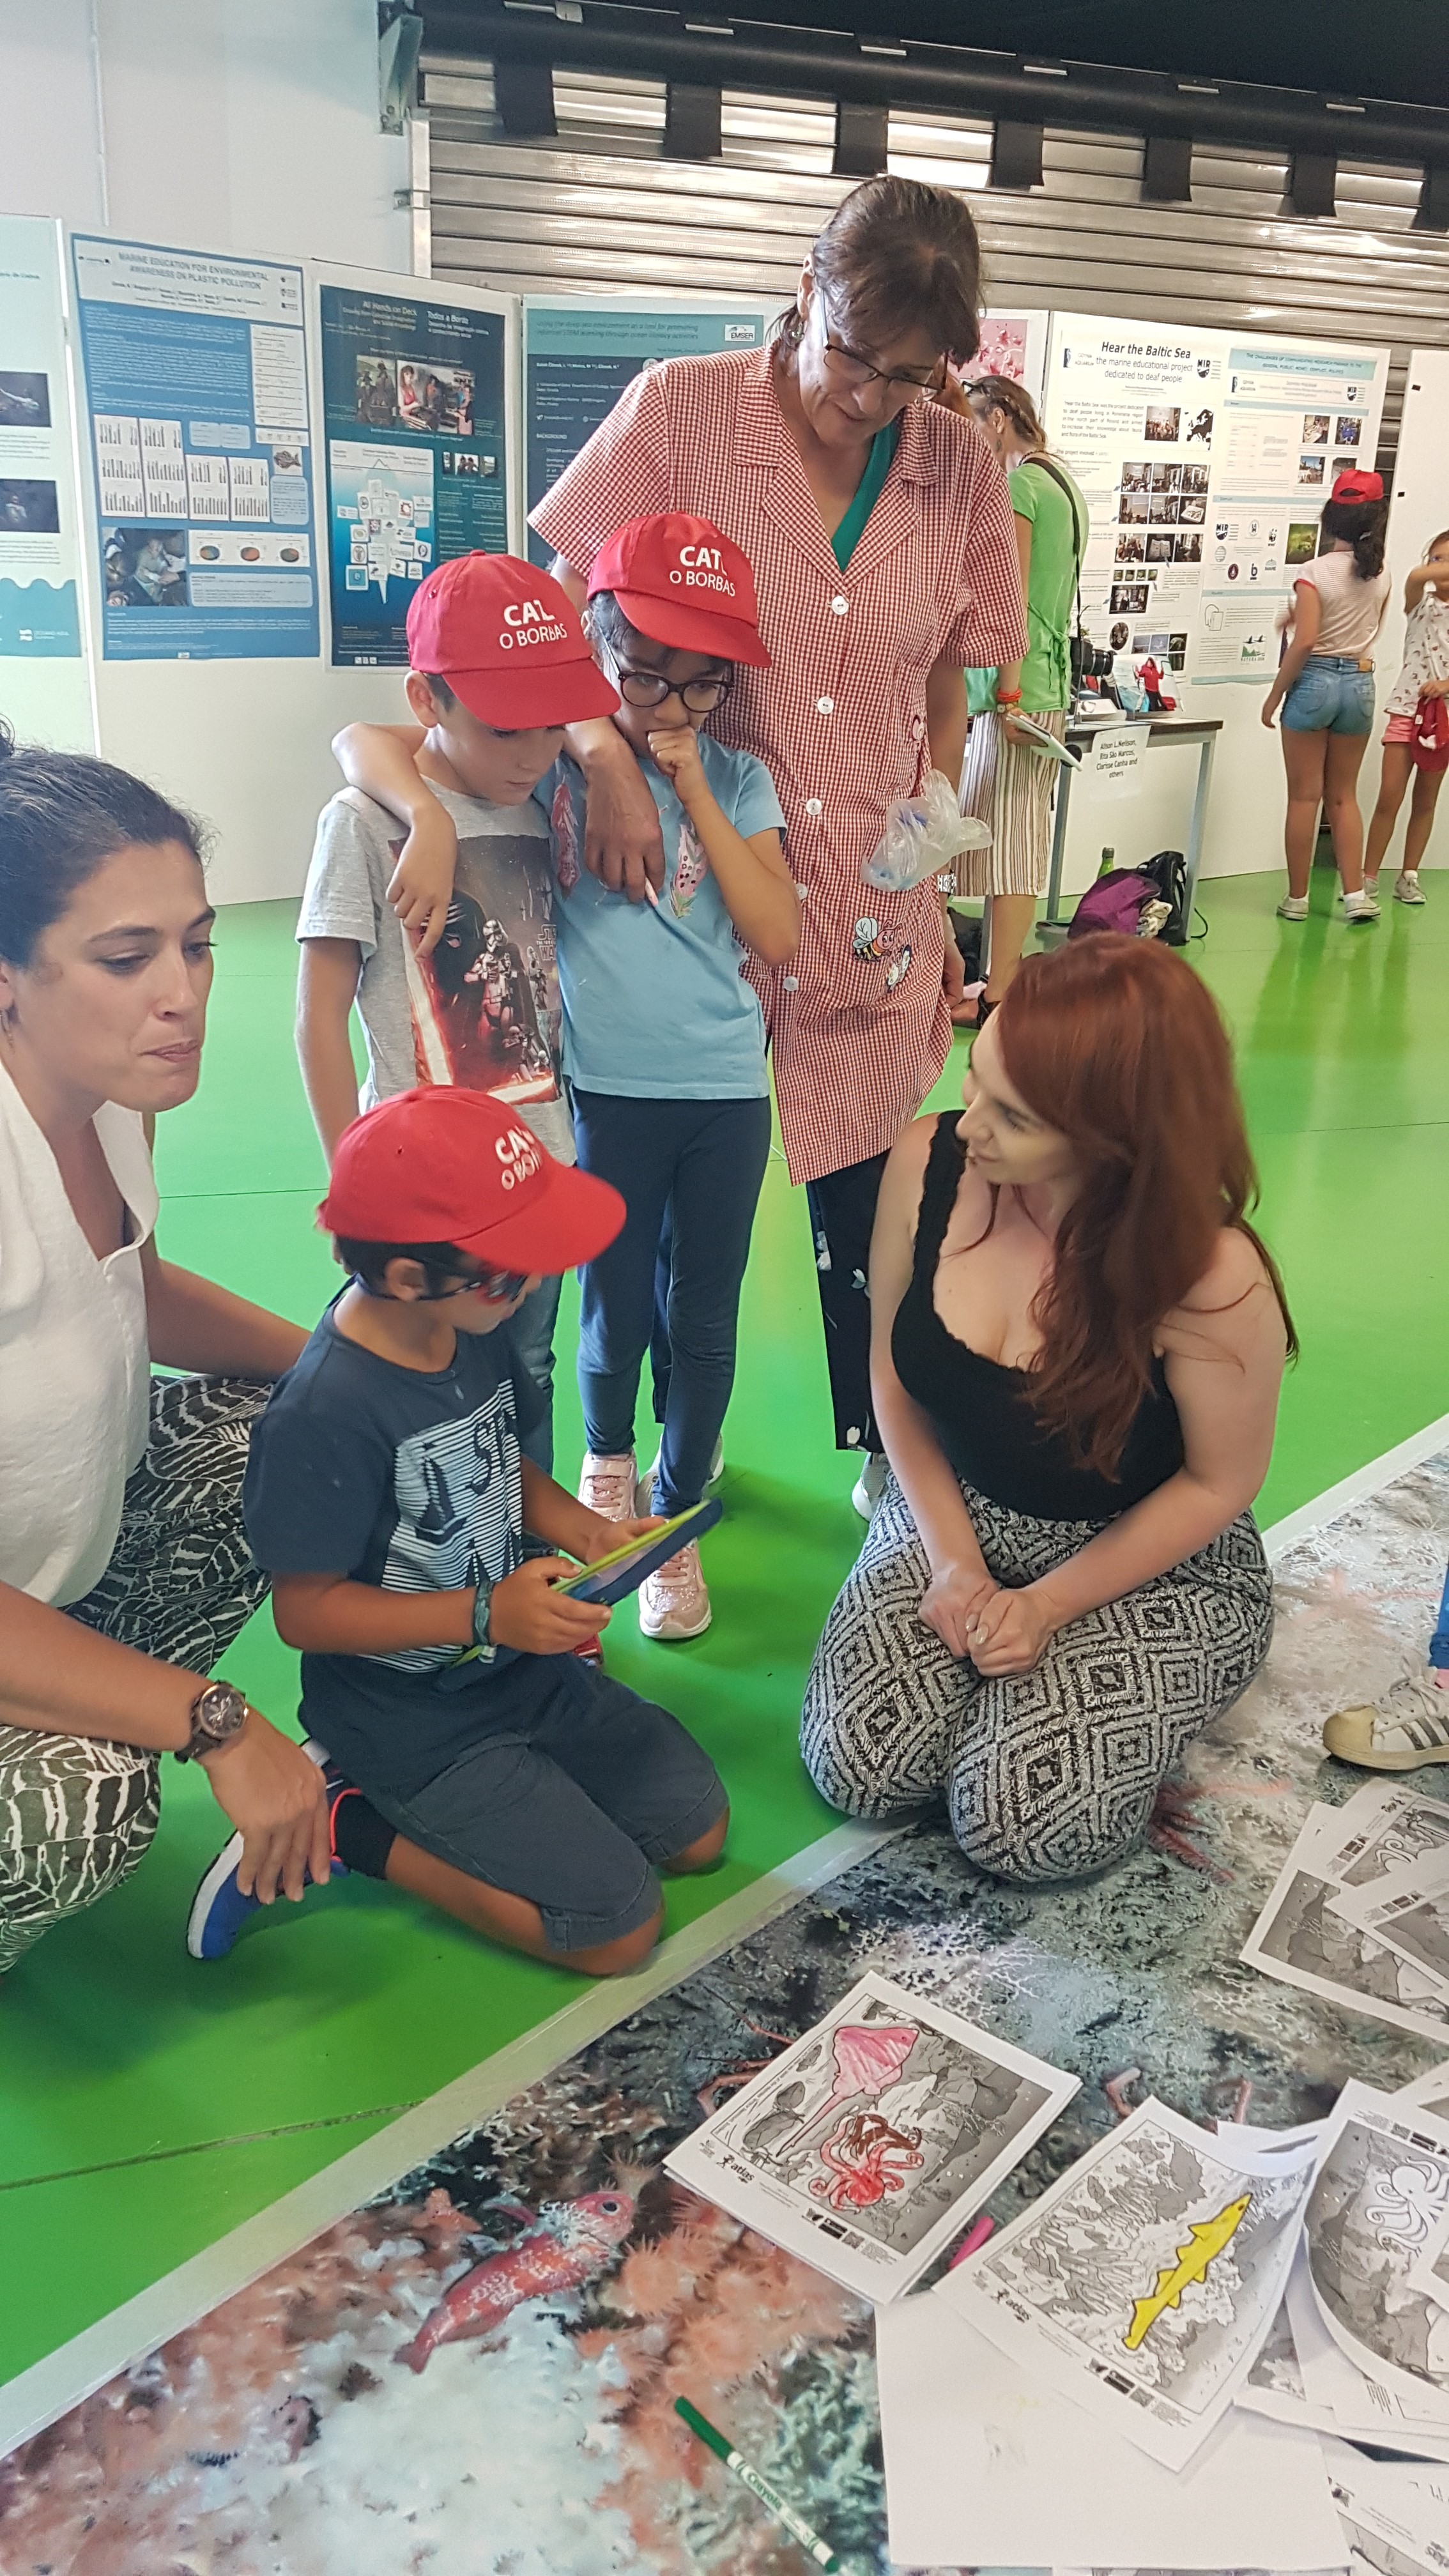 Children from a local school in São Miguel exploring AR colouring activity and learning about deep-sea animals with ATLAS Project Officer Natalie Walls. (c) Natalie Walls